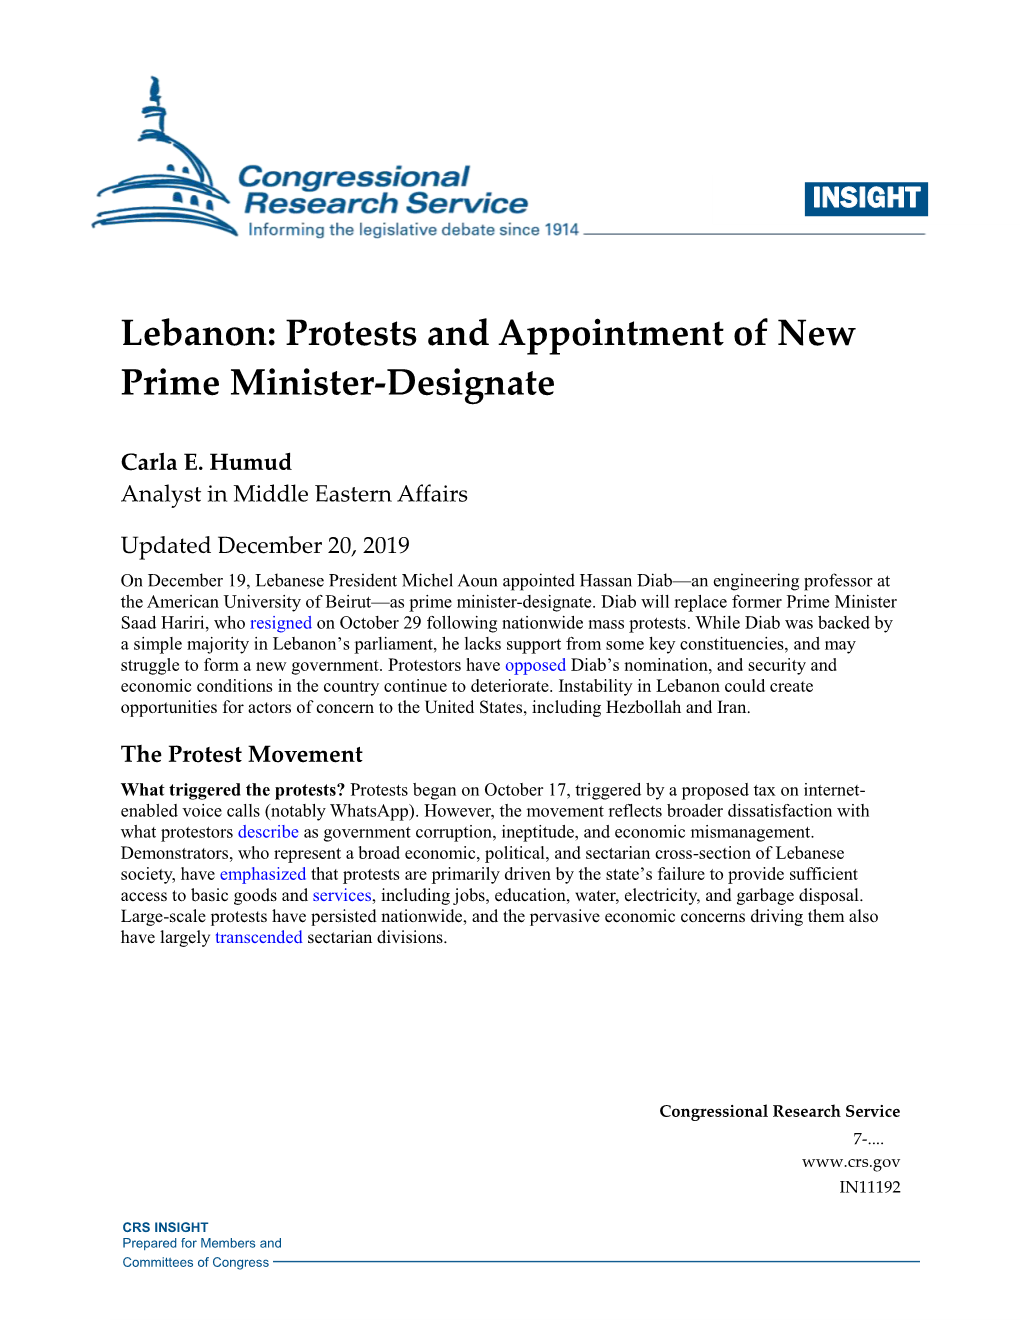 Lebanon: Protests and Appointment of New Prime Minister-Designate